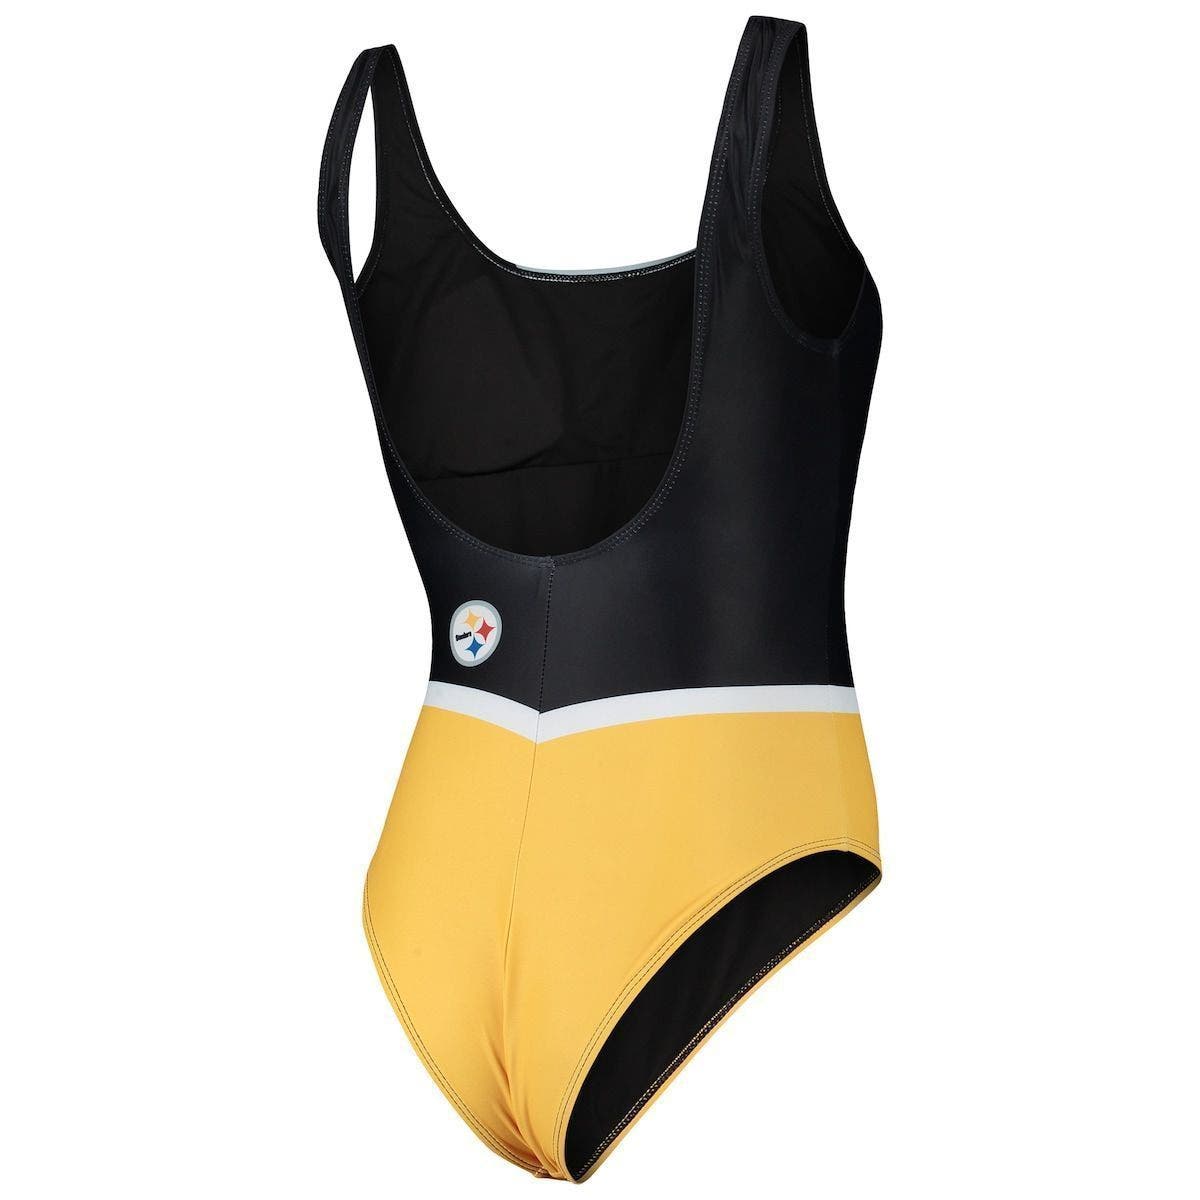 Pittsburgh Steelers One Piece Tank Swimsuit